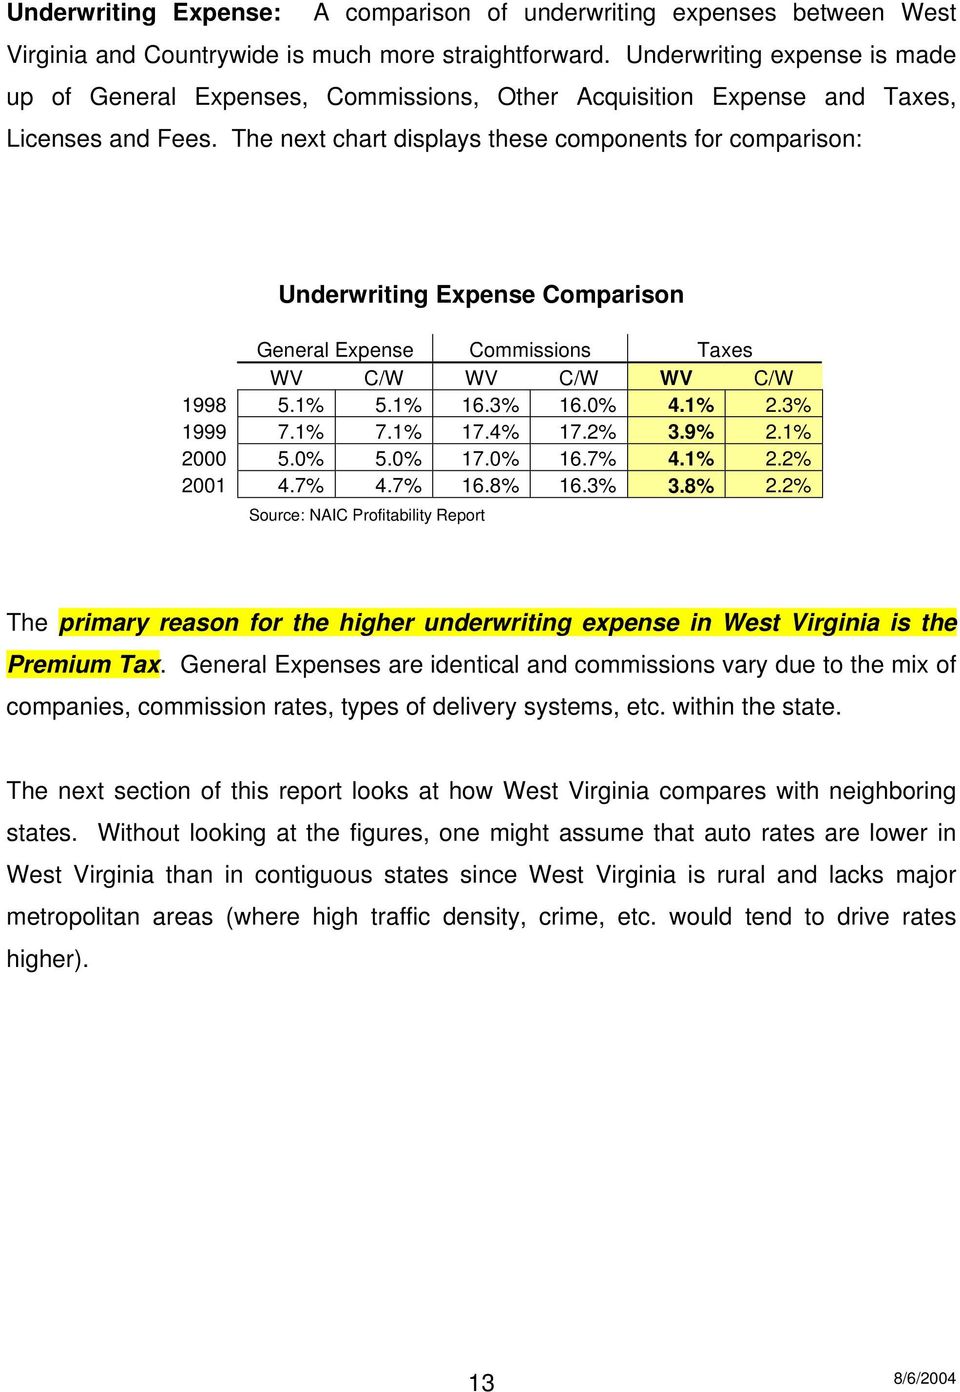 The next chart displays these components for comparison: Underwriting Expense Comparison General Expense Commissions Taxes WV C/W WV C/W WV C/W 1998 5.1% 5.1% 16.3% 16.0% 4.1% 2.3% 1999 7.1% 7.1% 17.